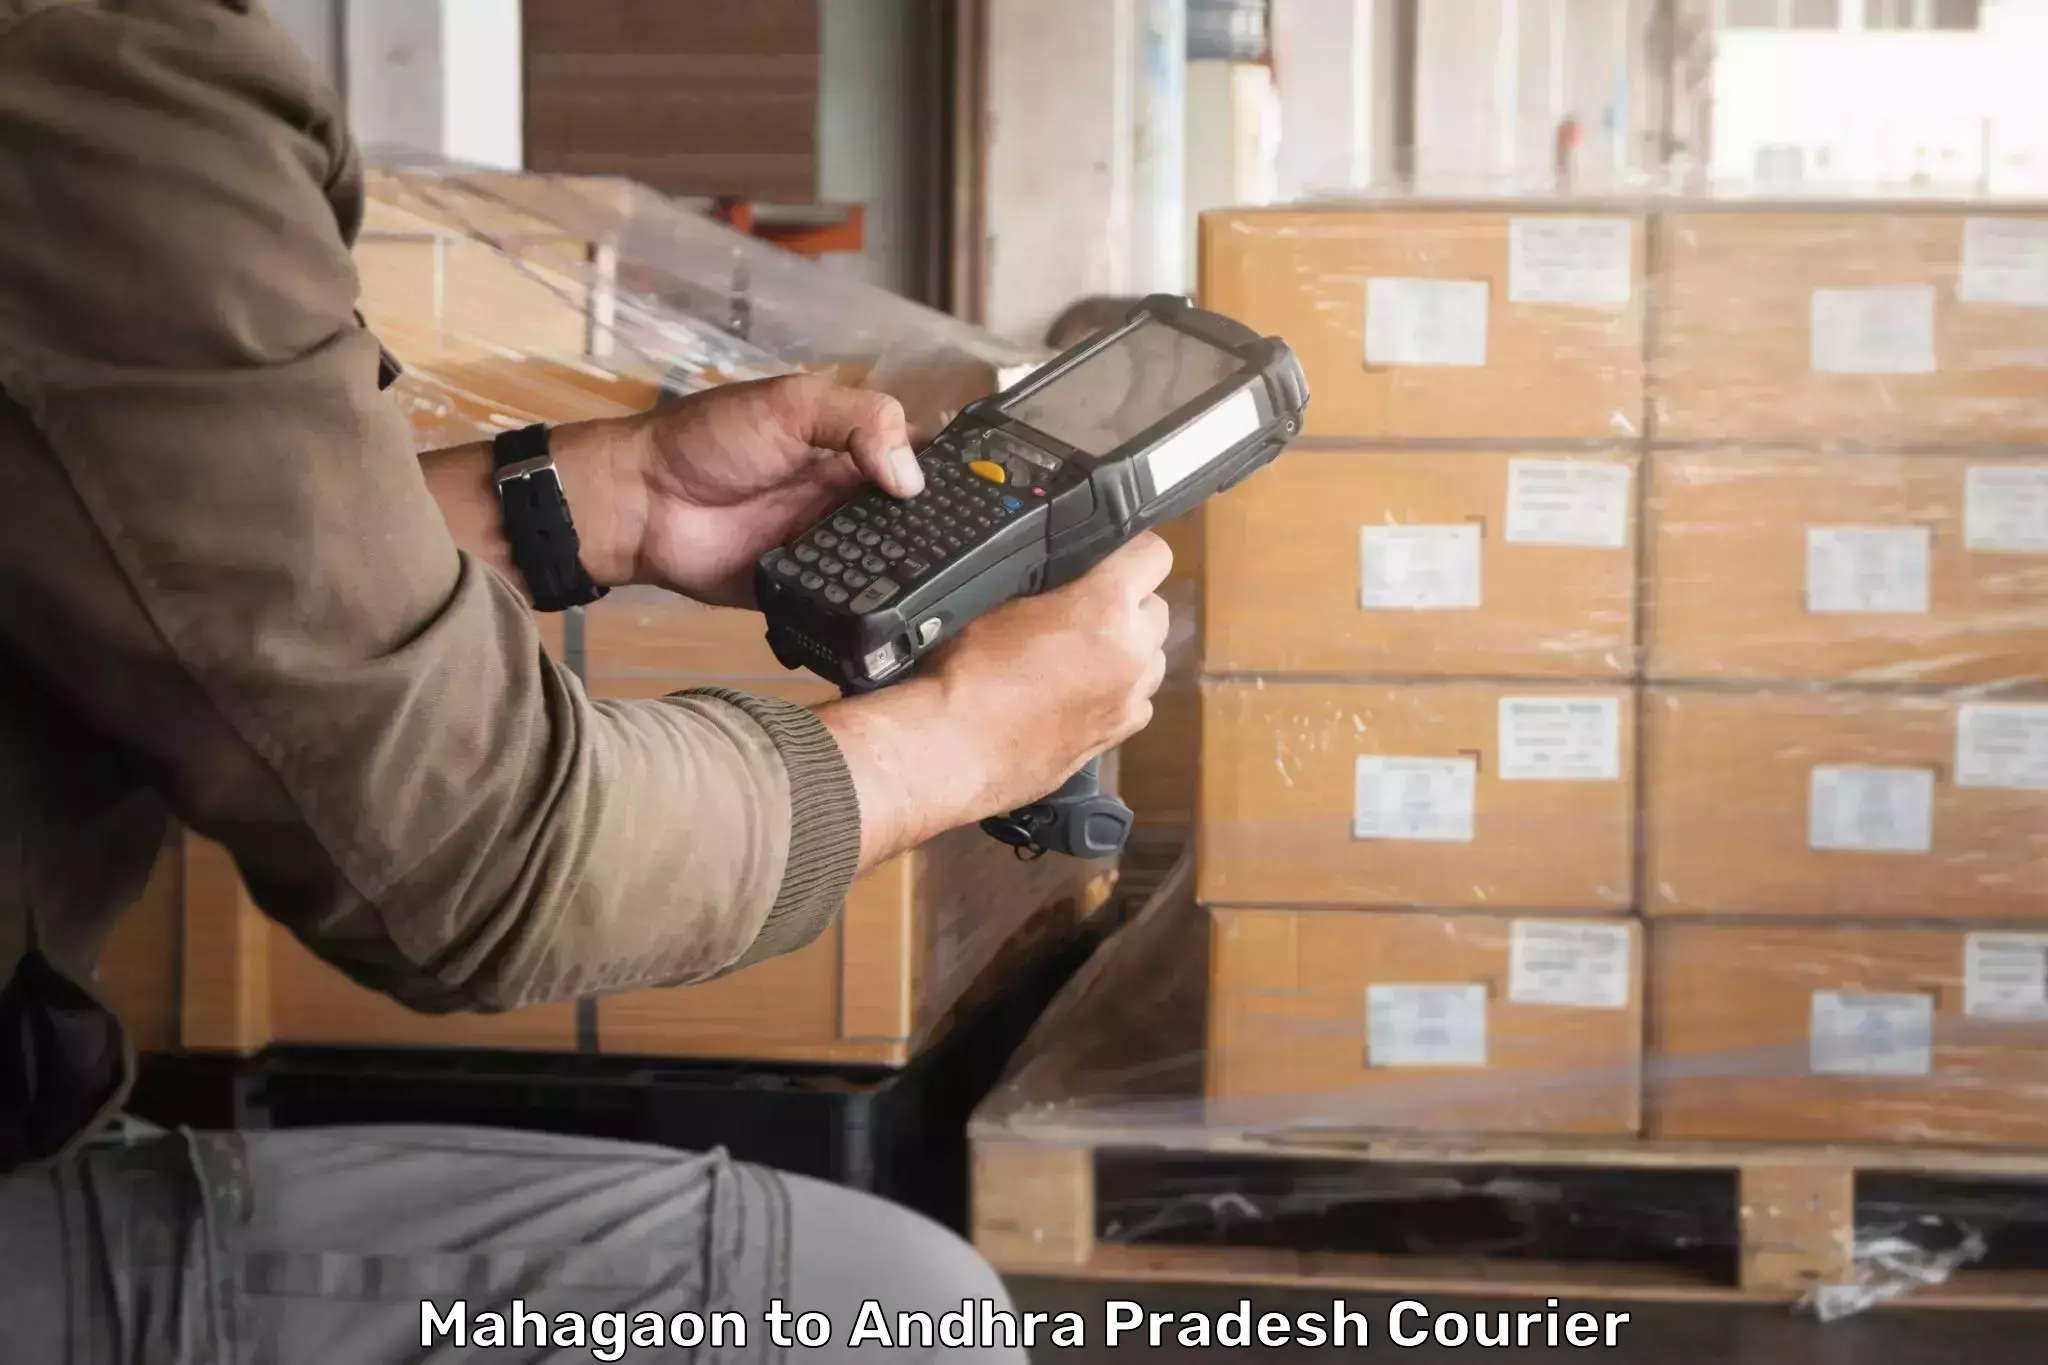 Professional courier handling Mahagaon to Dachepalle